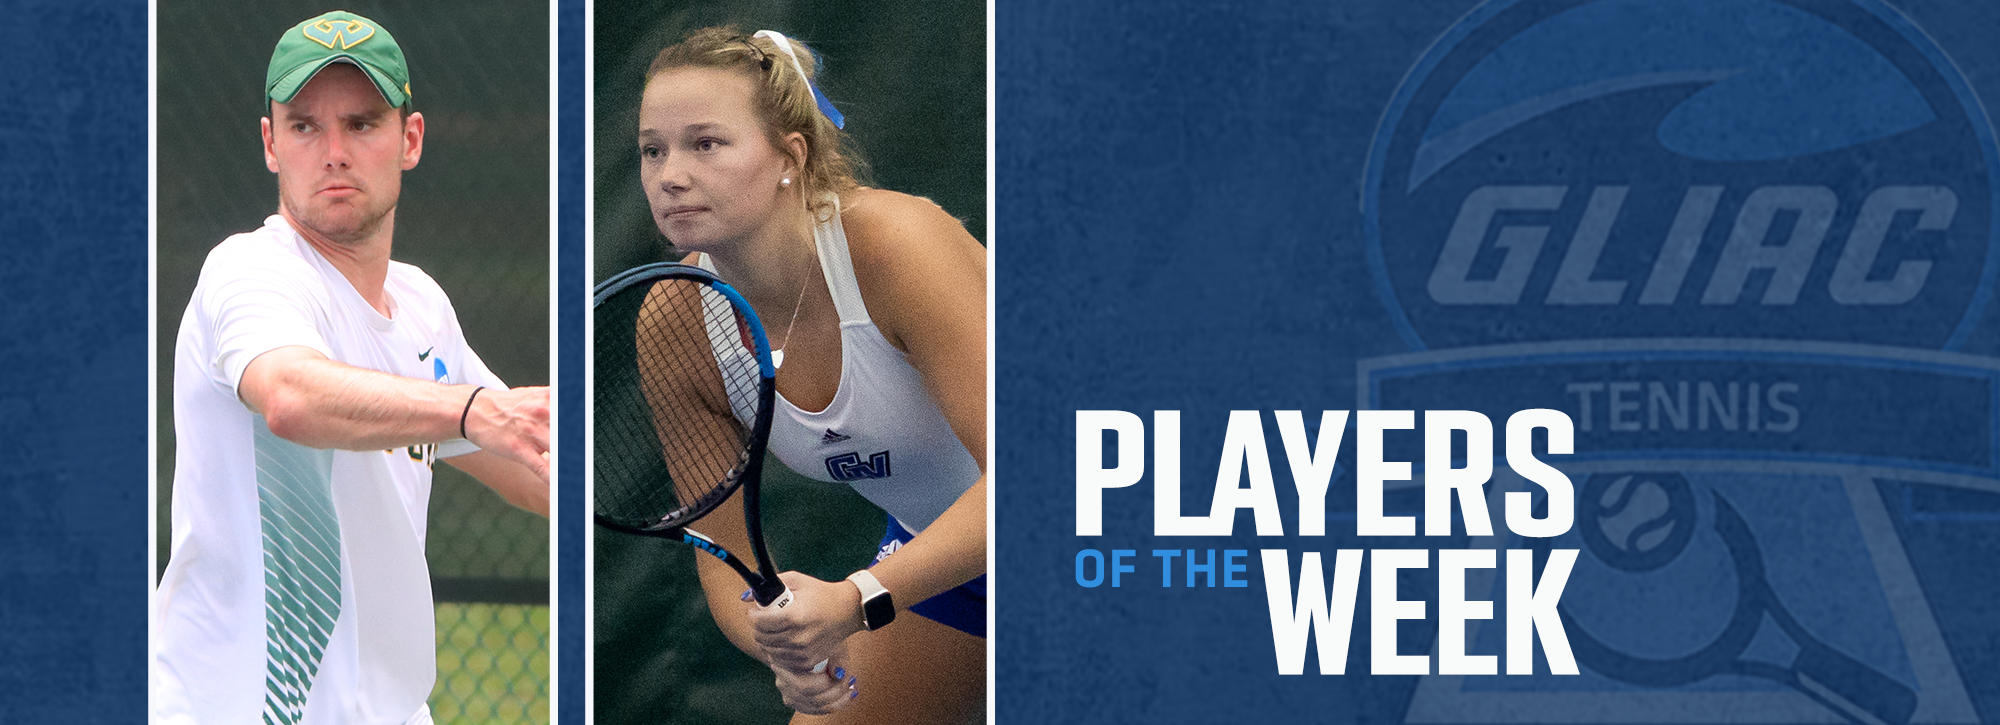 WSU's Grey and GVSU's Barrett recognized with GLIAC Tennis Player of the Week honors